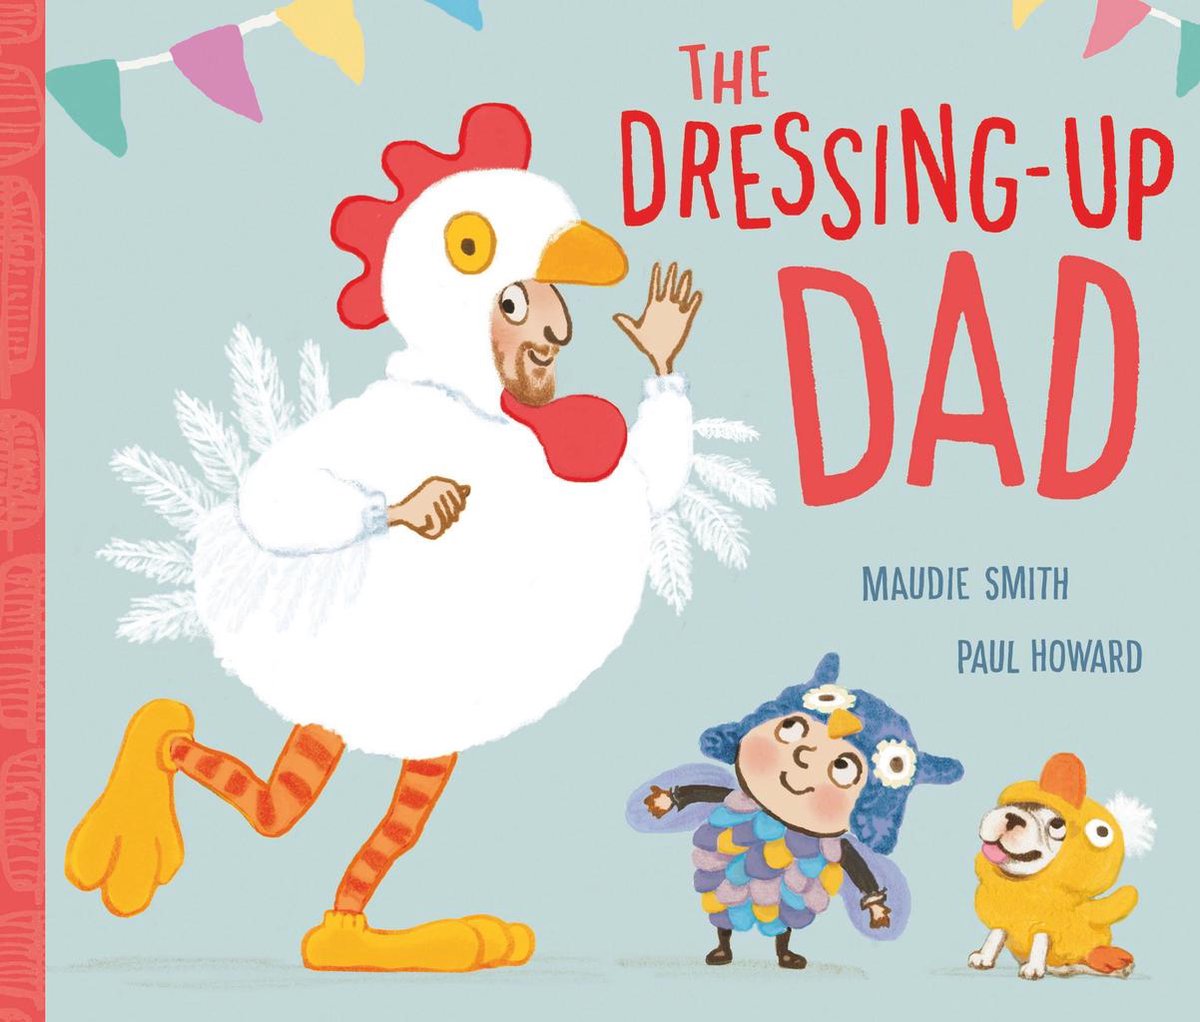 The Dressing-Up Dad - Maudie Smith